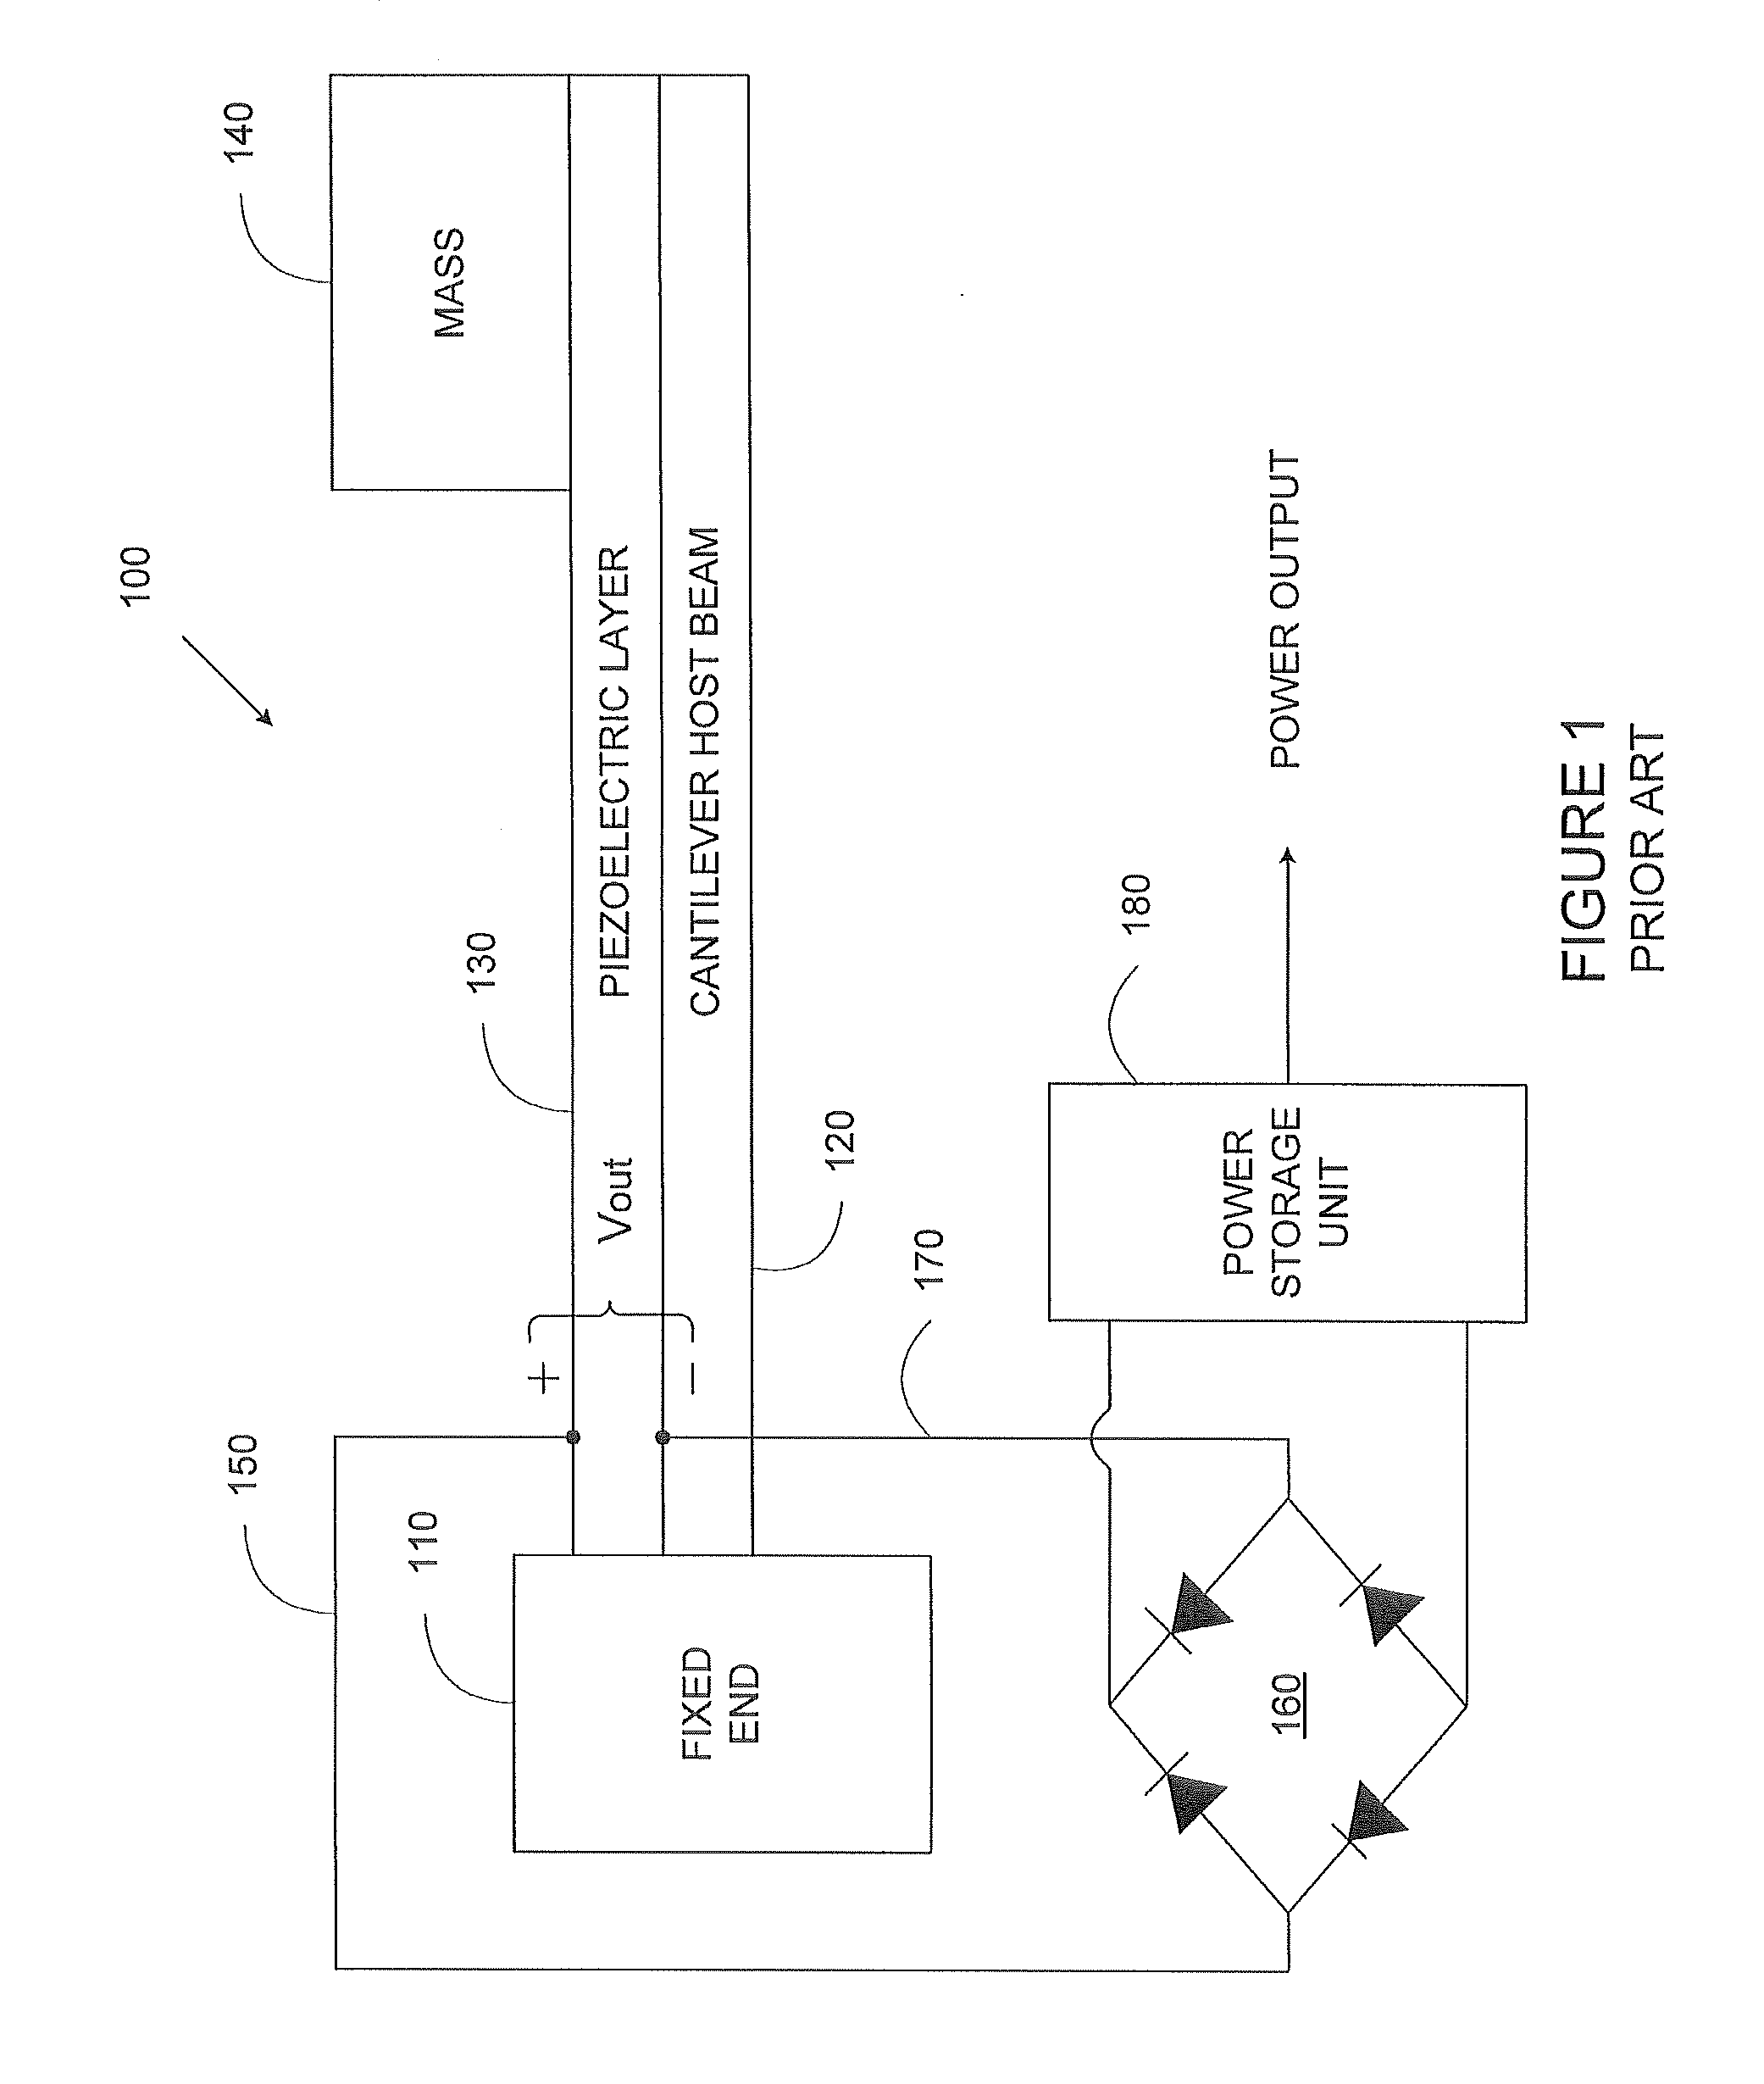 System and method for providing a piezoelectric electromagnetic hybrid vibrating energy harvester